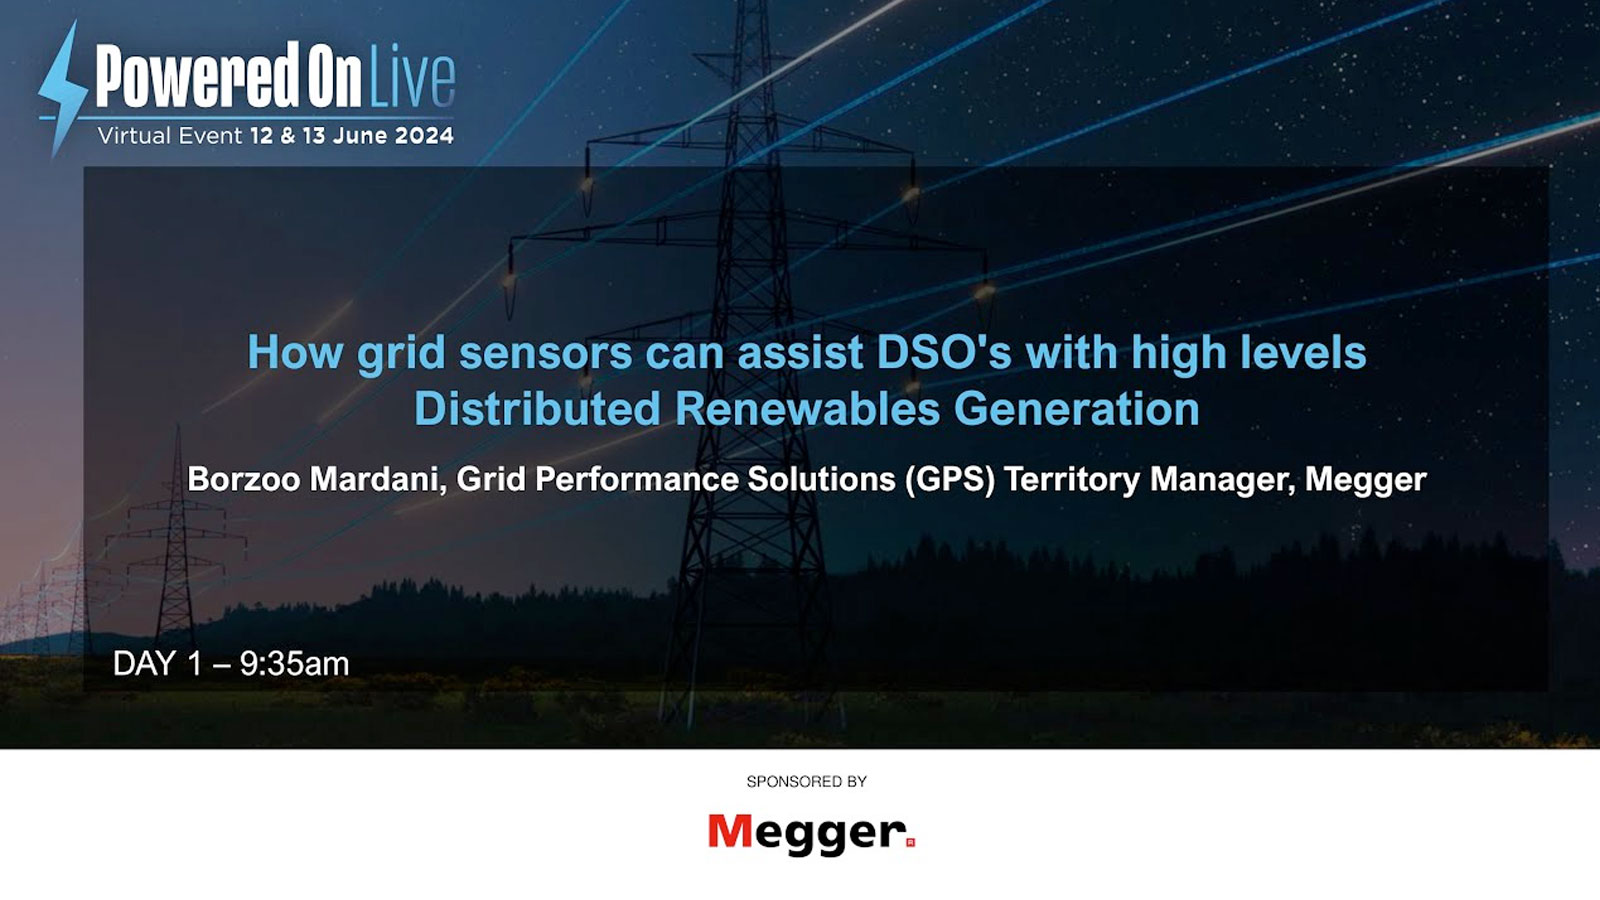 How grid sensors can assist DSOs with distributed renewables